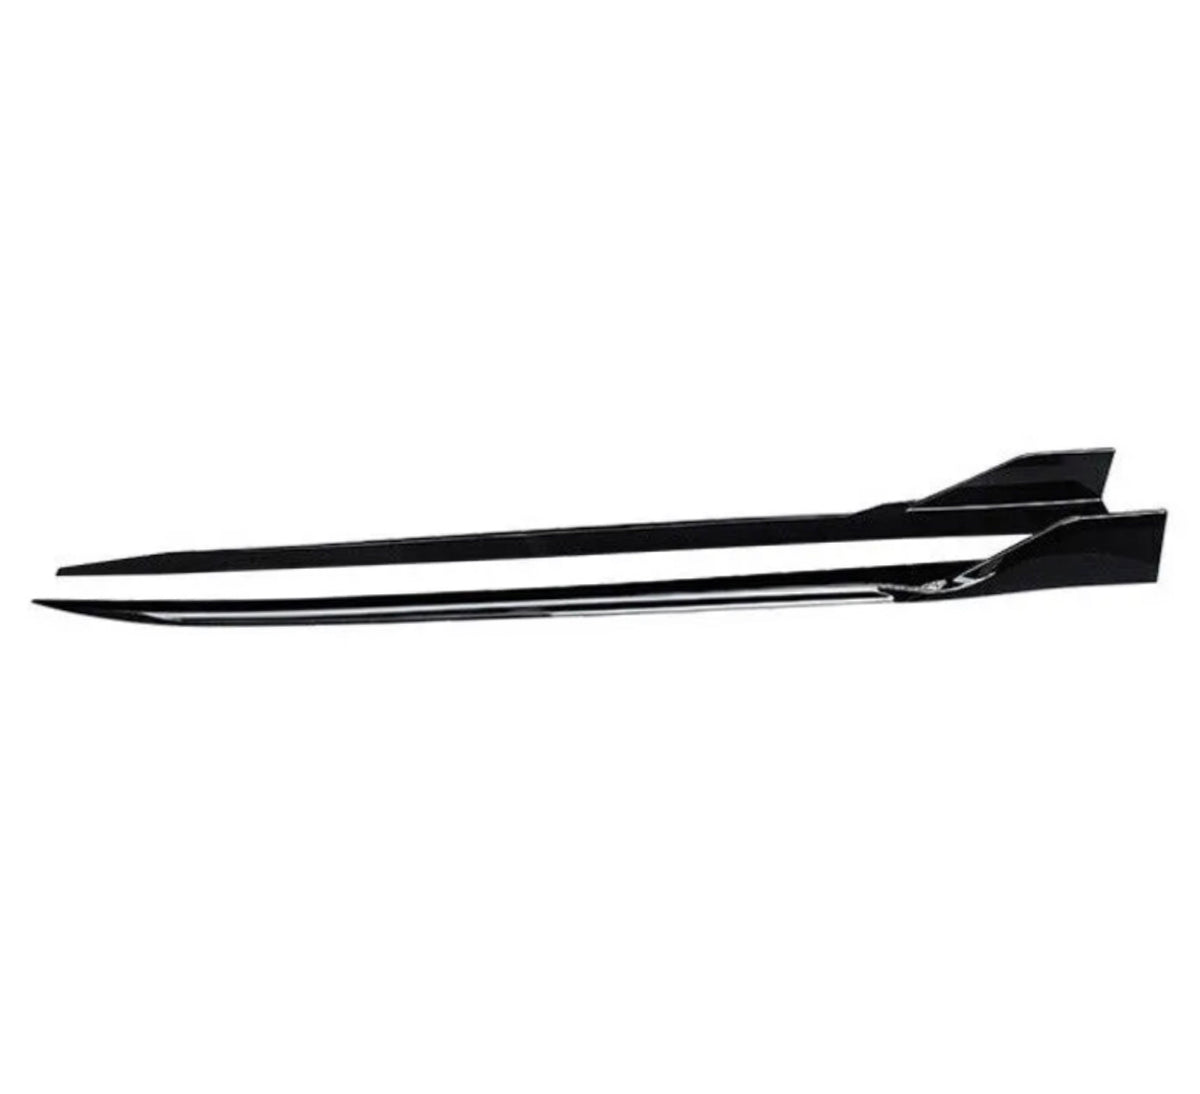 More images please Car Side Extension Blades - Fits BMW G26 - 4 Series - Gloss Black - STM STYLING 